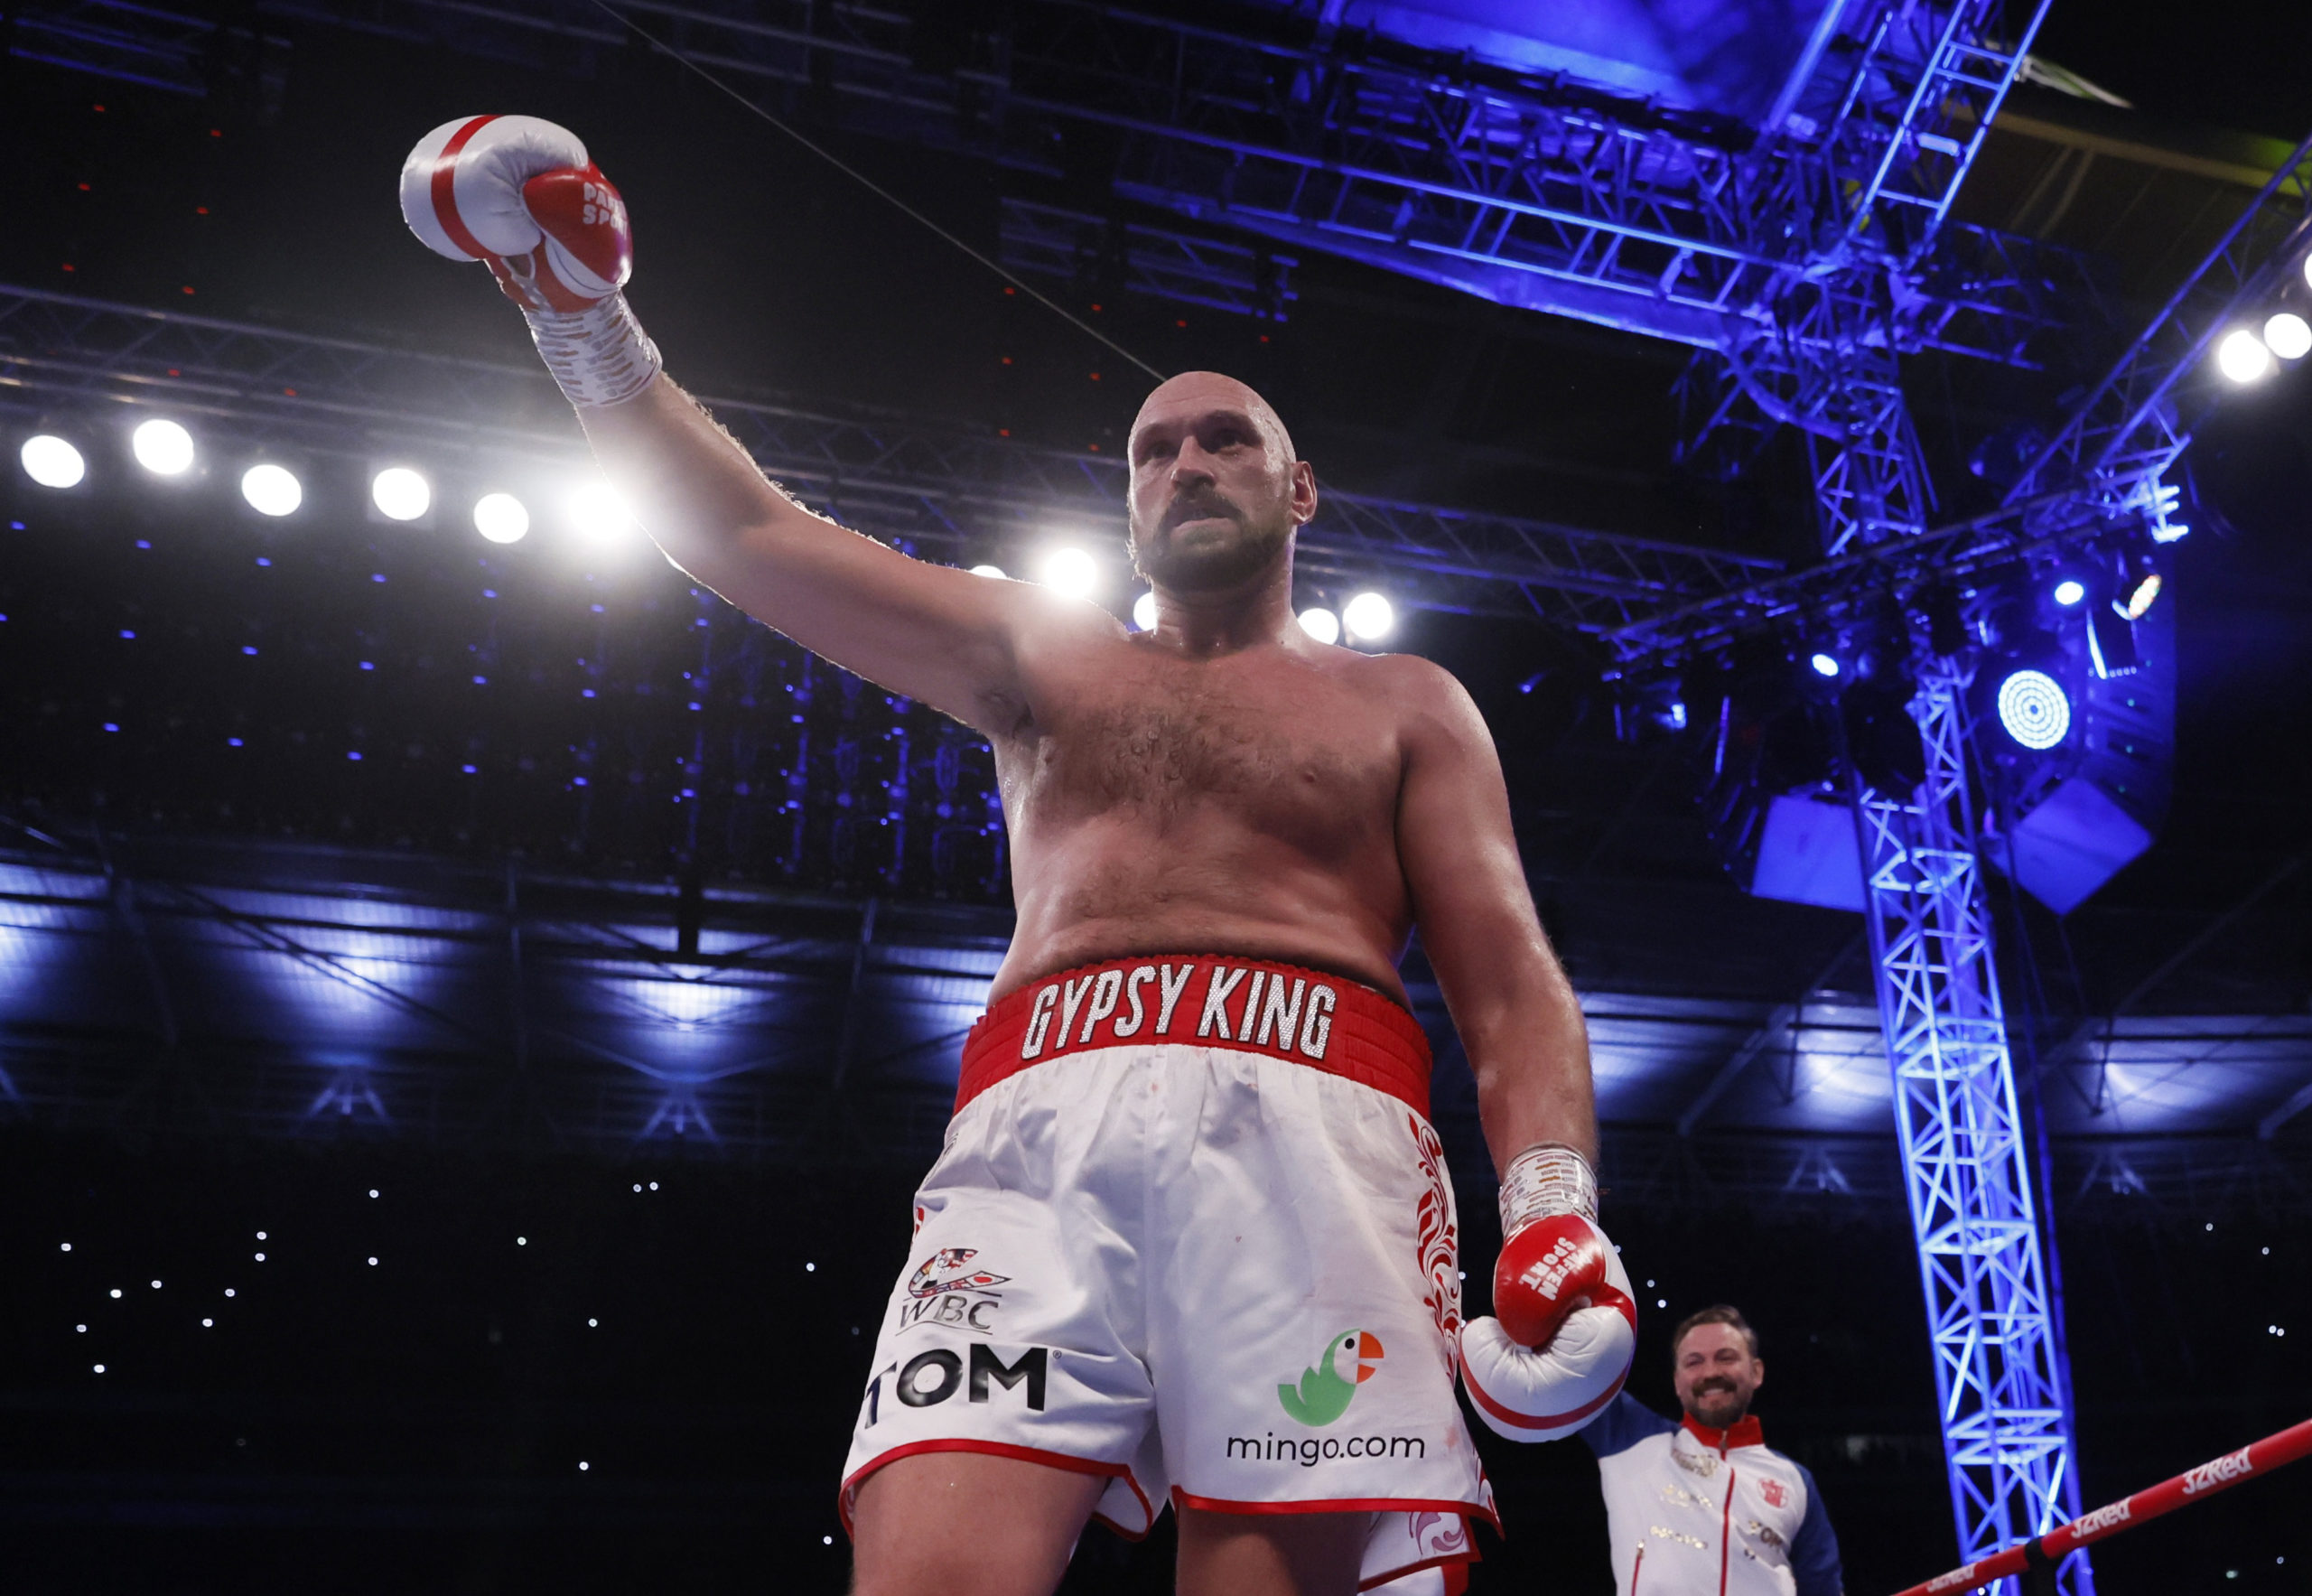 FILE PHOTO: Boxing - Tyson Fury v Dillian Whyte - WBC World Heavyweight Title - Wembley Stadium, London, Britain - April 23, 2022 Tyson Fury celebrates winning his fight against Dillian Whyte Action Images via Reuters/Andrew Couldridge